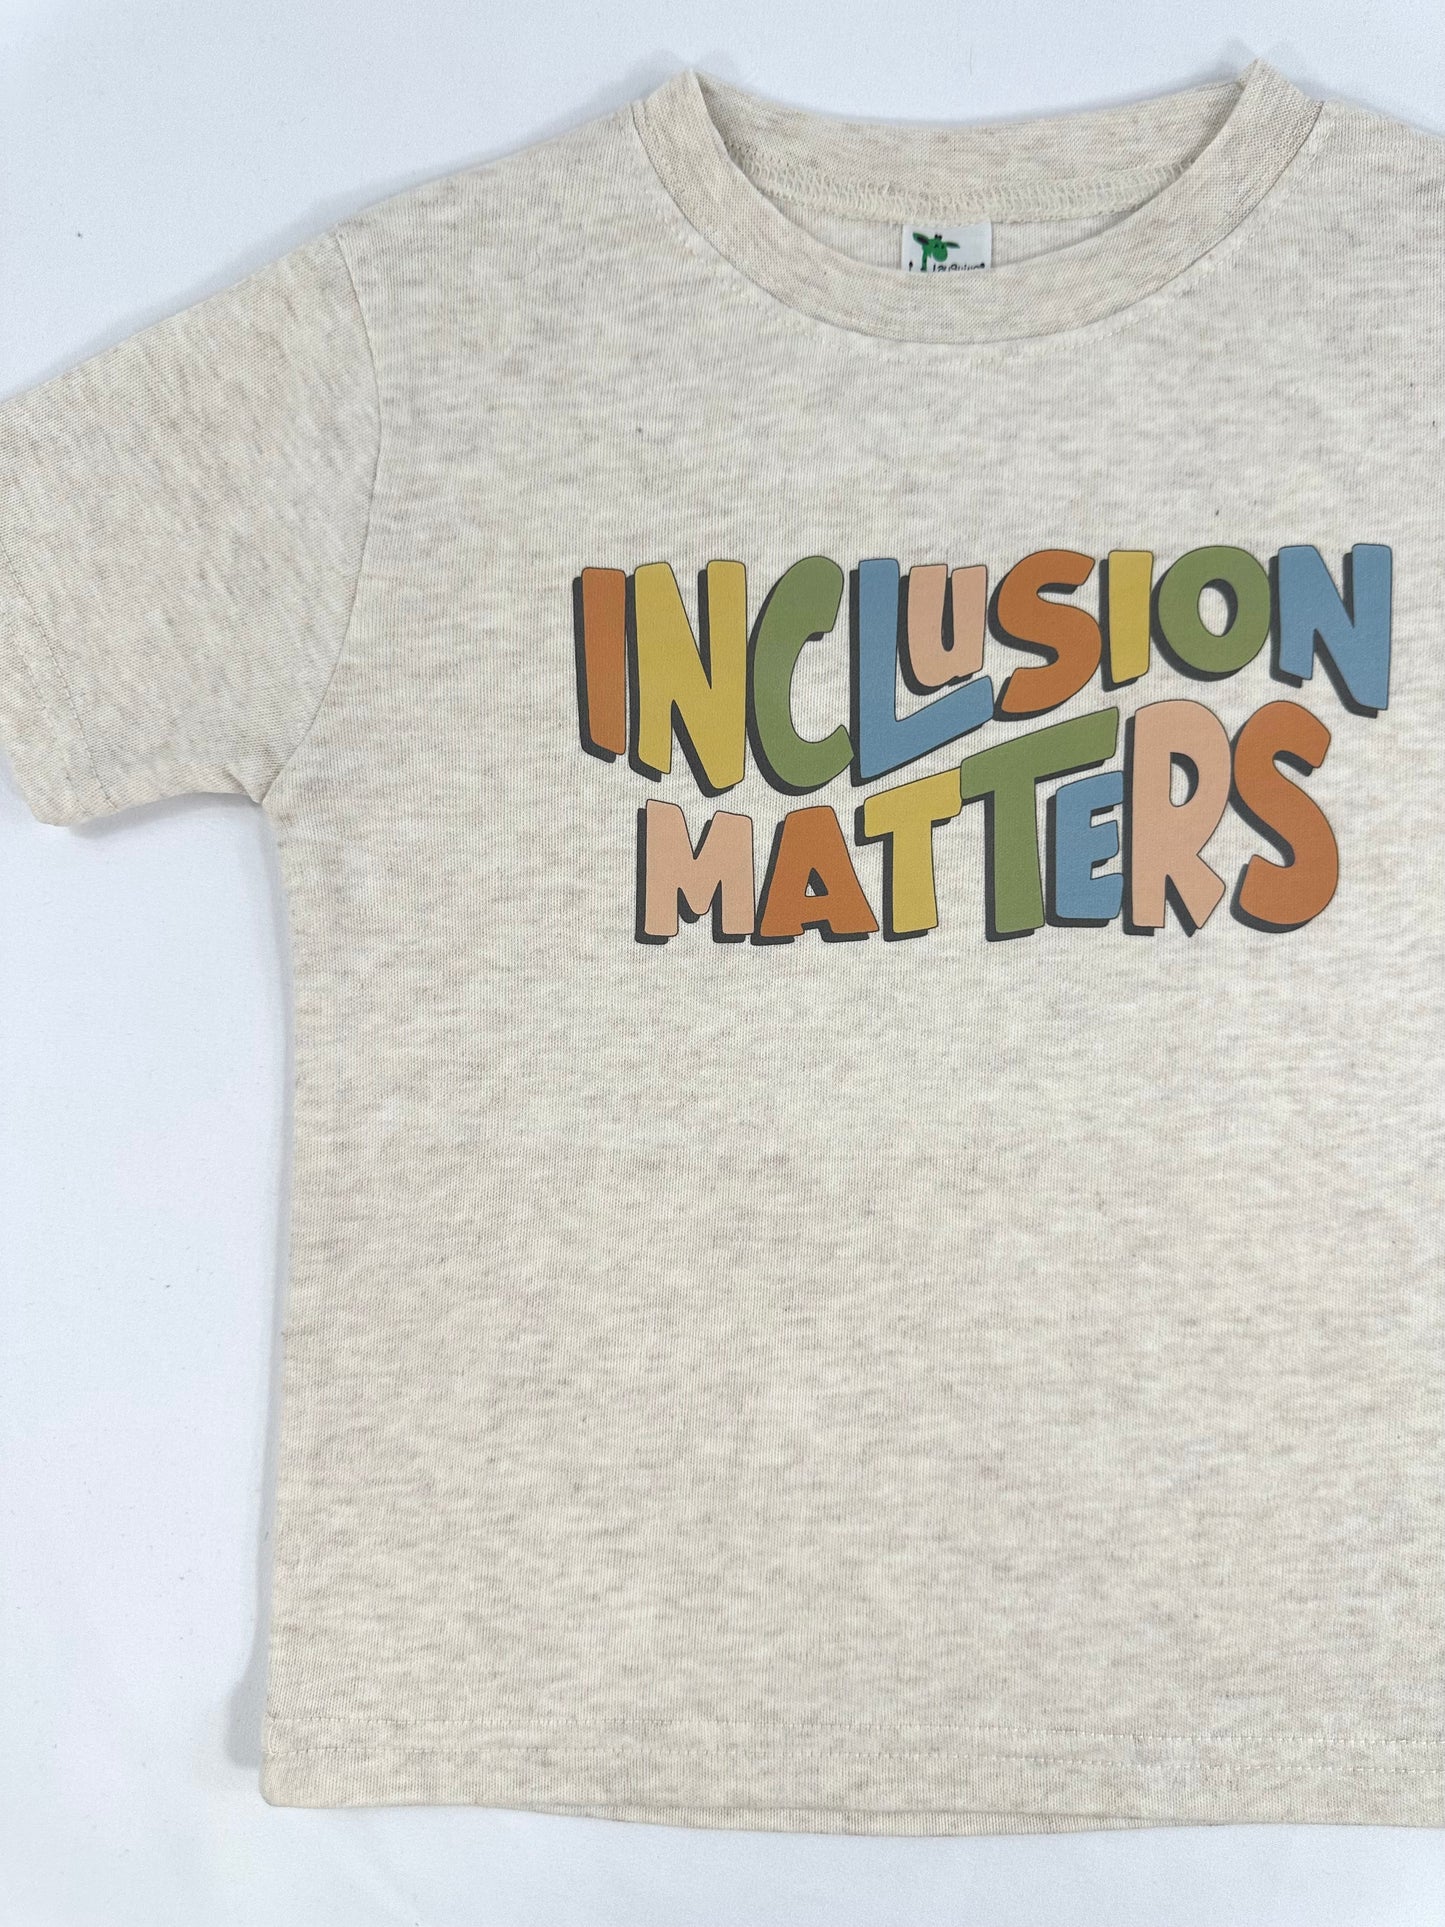 Inclusion Matters